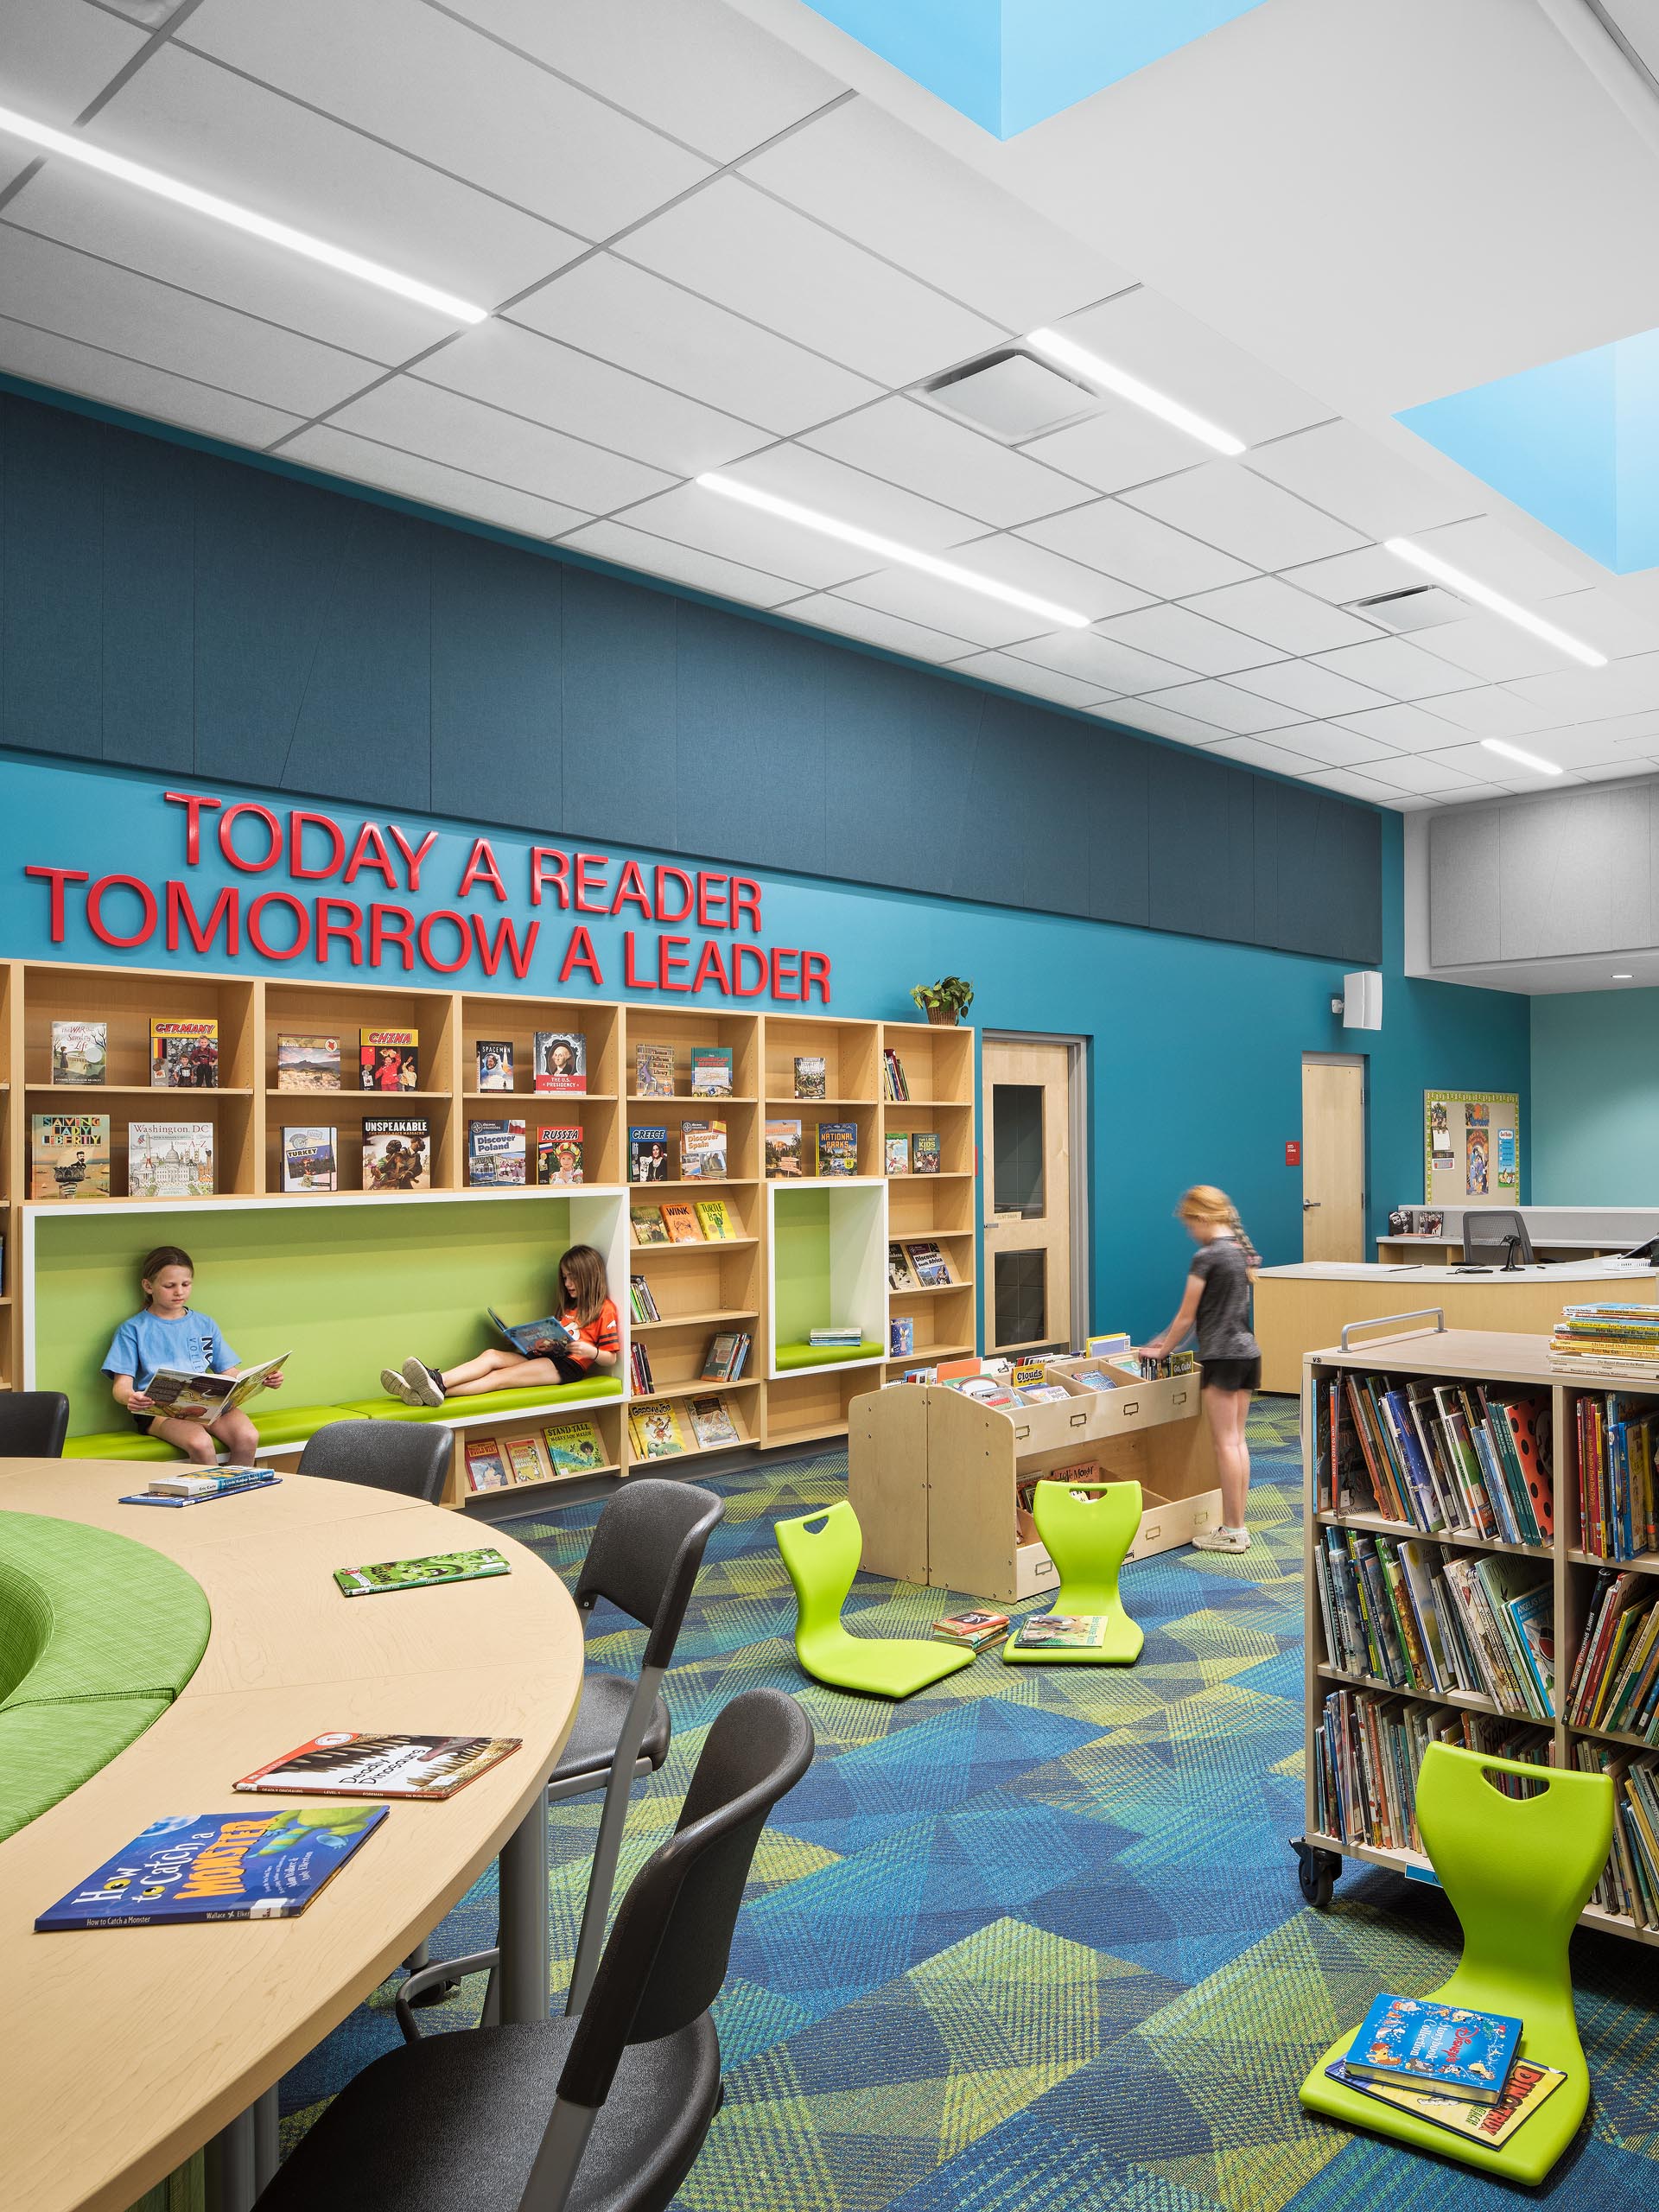 Architectural photography by Warren Diggles. Eaton Elementary students looking through books and reading in media room. K-12 remodel project by RB+B Architects and FCI Constructors.